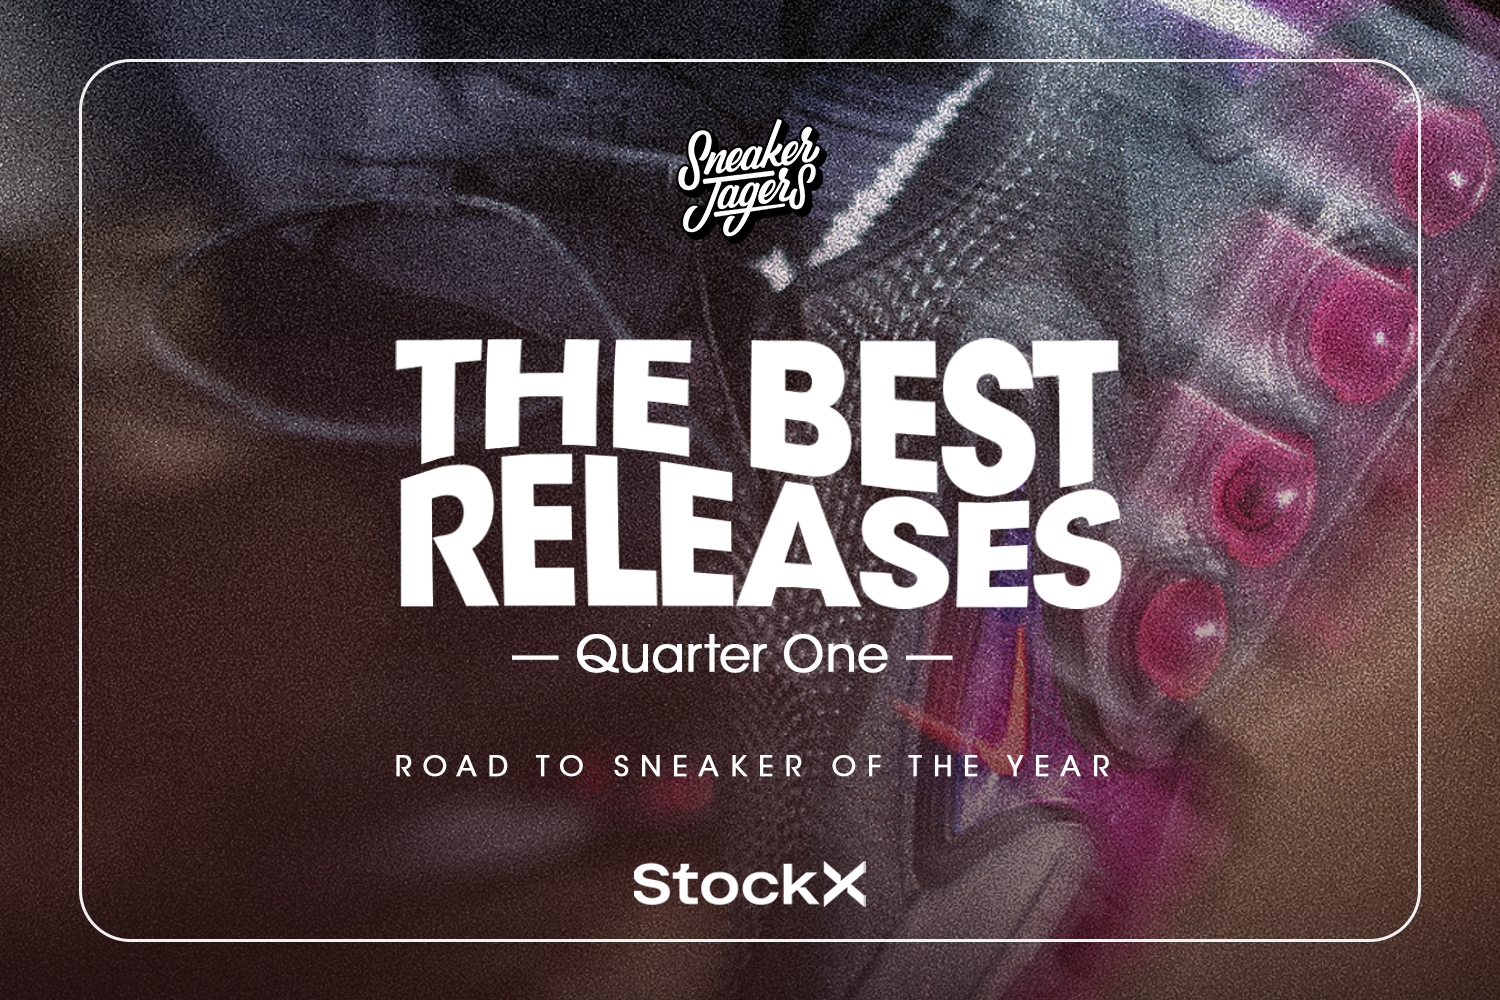 Sneakerjagers Road to Sneaker of the Year giveaway - Top 3 releases